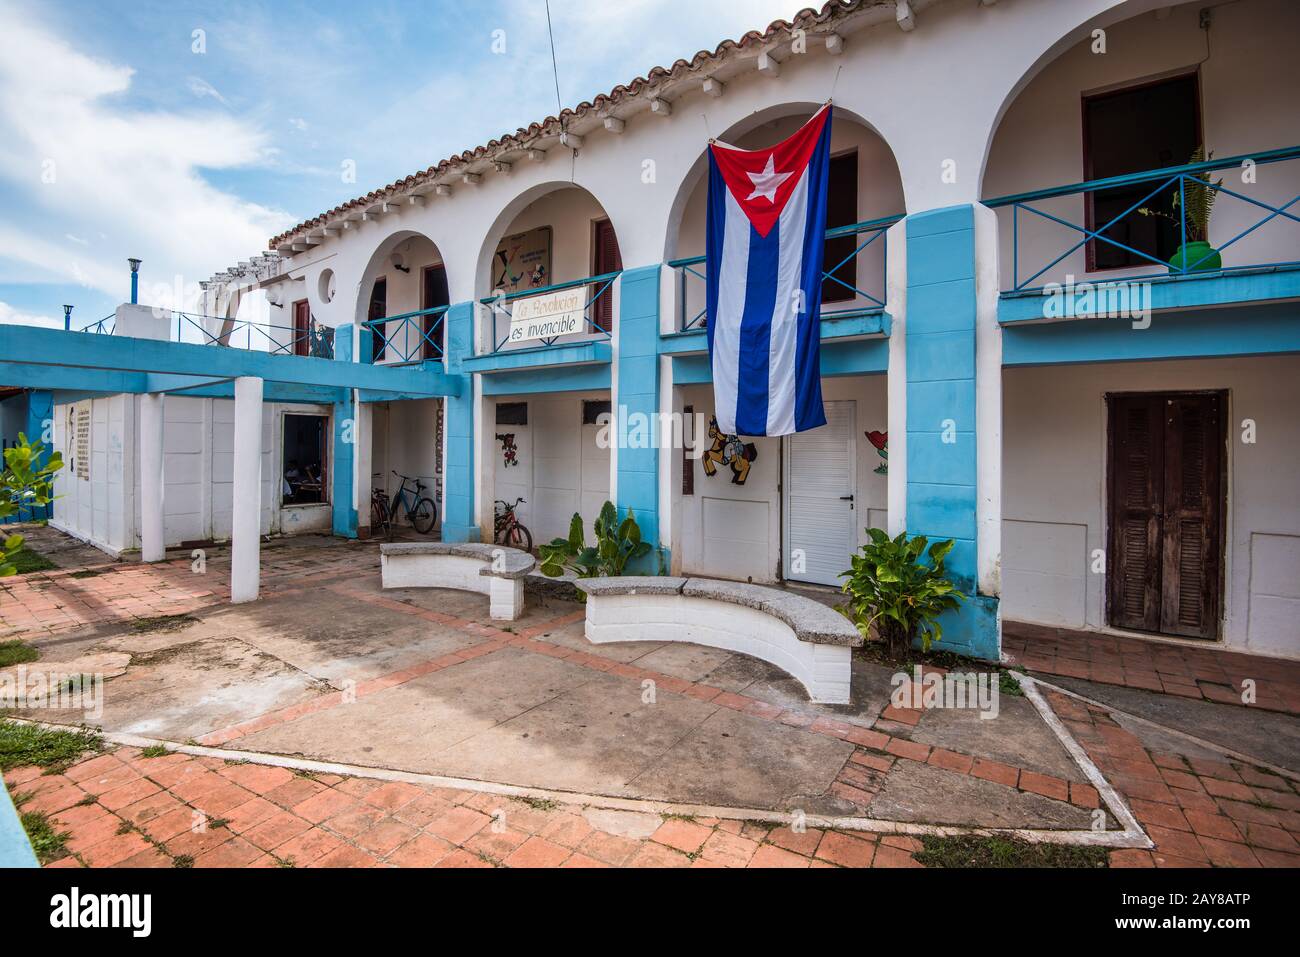 Cuban bandera or flag on colonial building Stock Photo